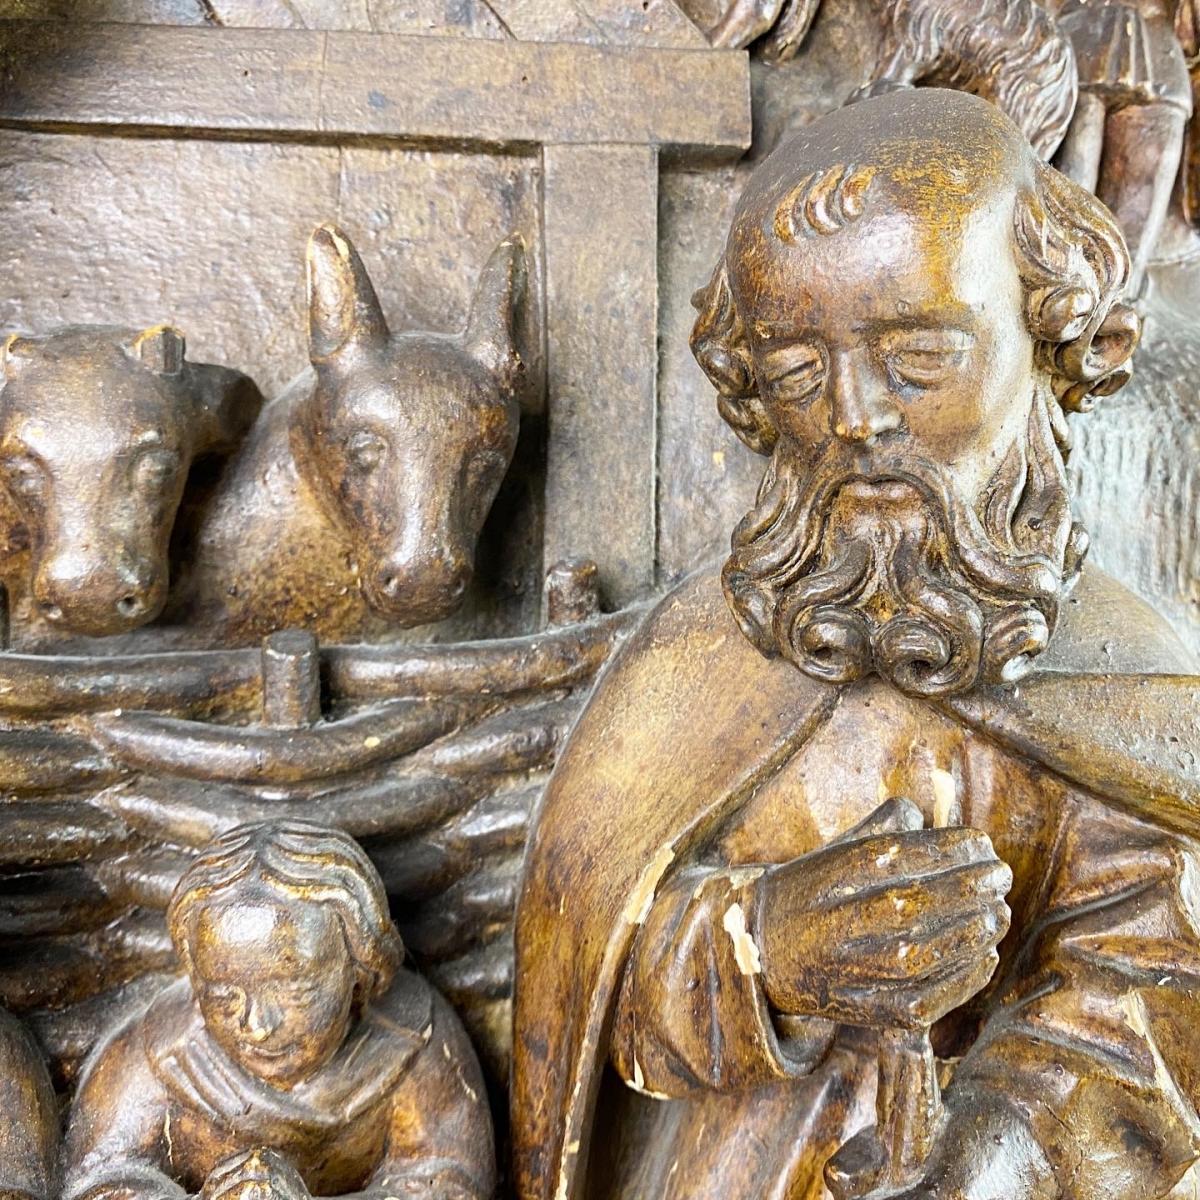 Imposing lime wood relief of the Nativity. Southern Germany, early 16th century